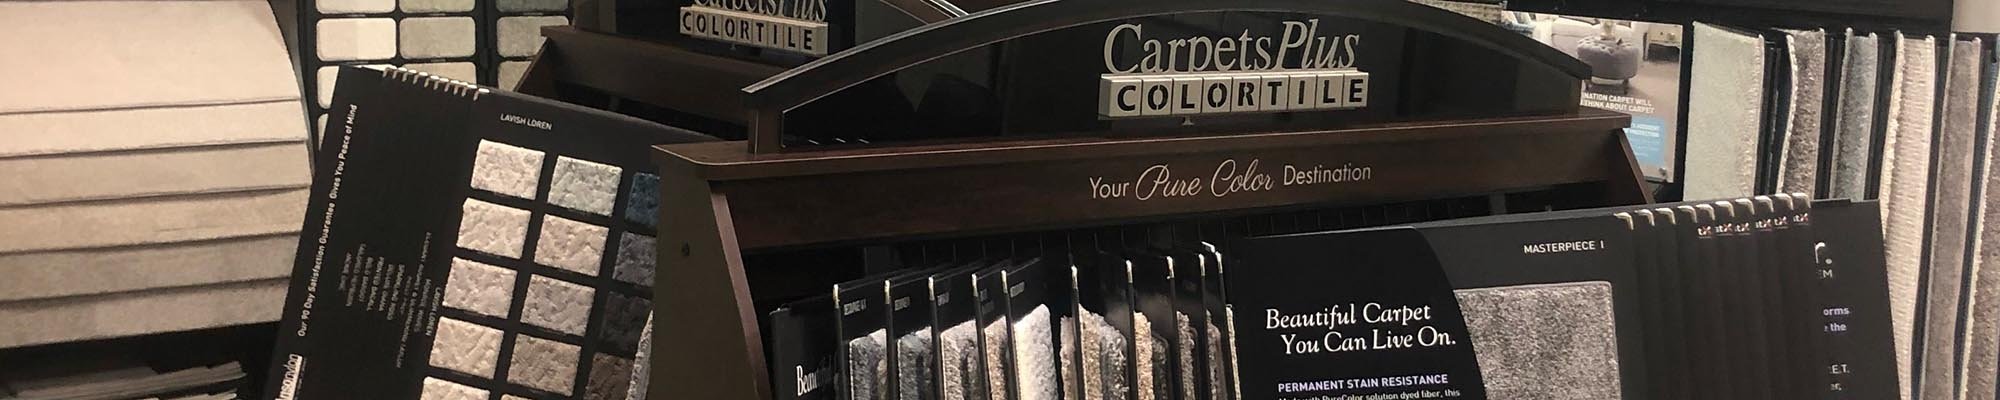 Local Flooring Retailer in Coeur d'Alene, Idaho - Carpet Warehouse and COLORTILE providing a wide selection of flooring and expert advice.